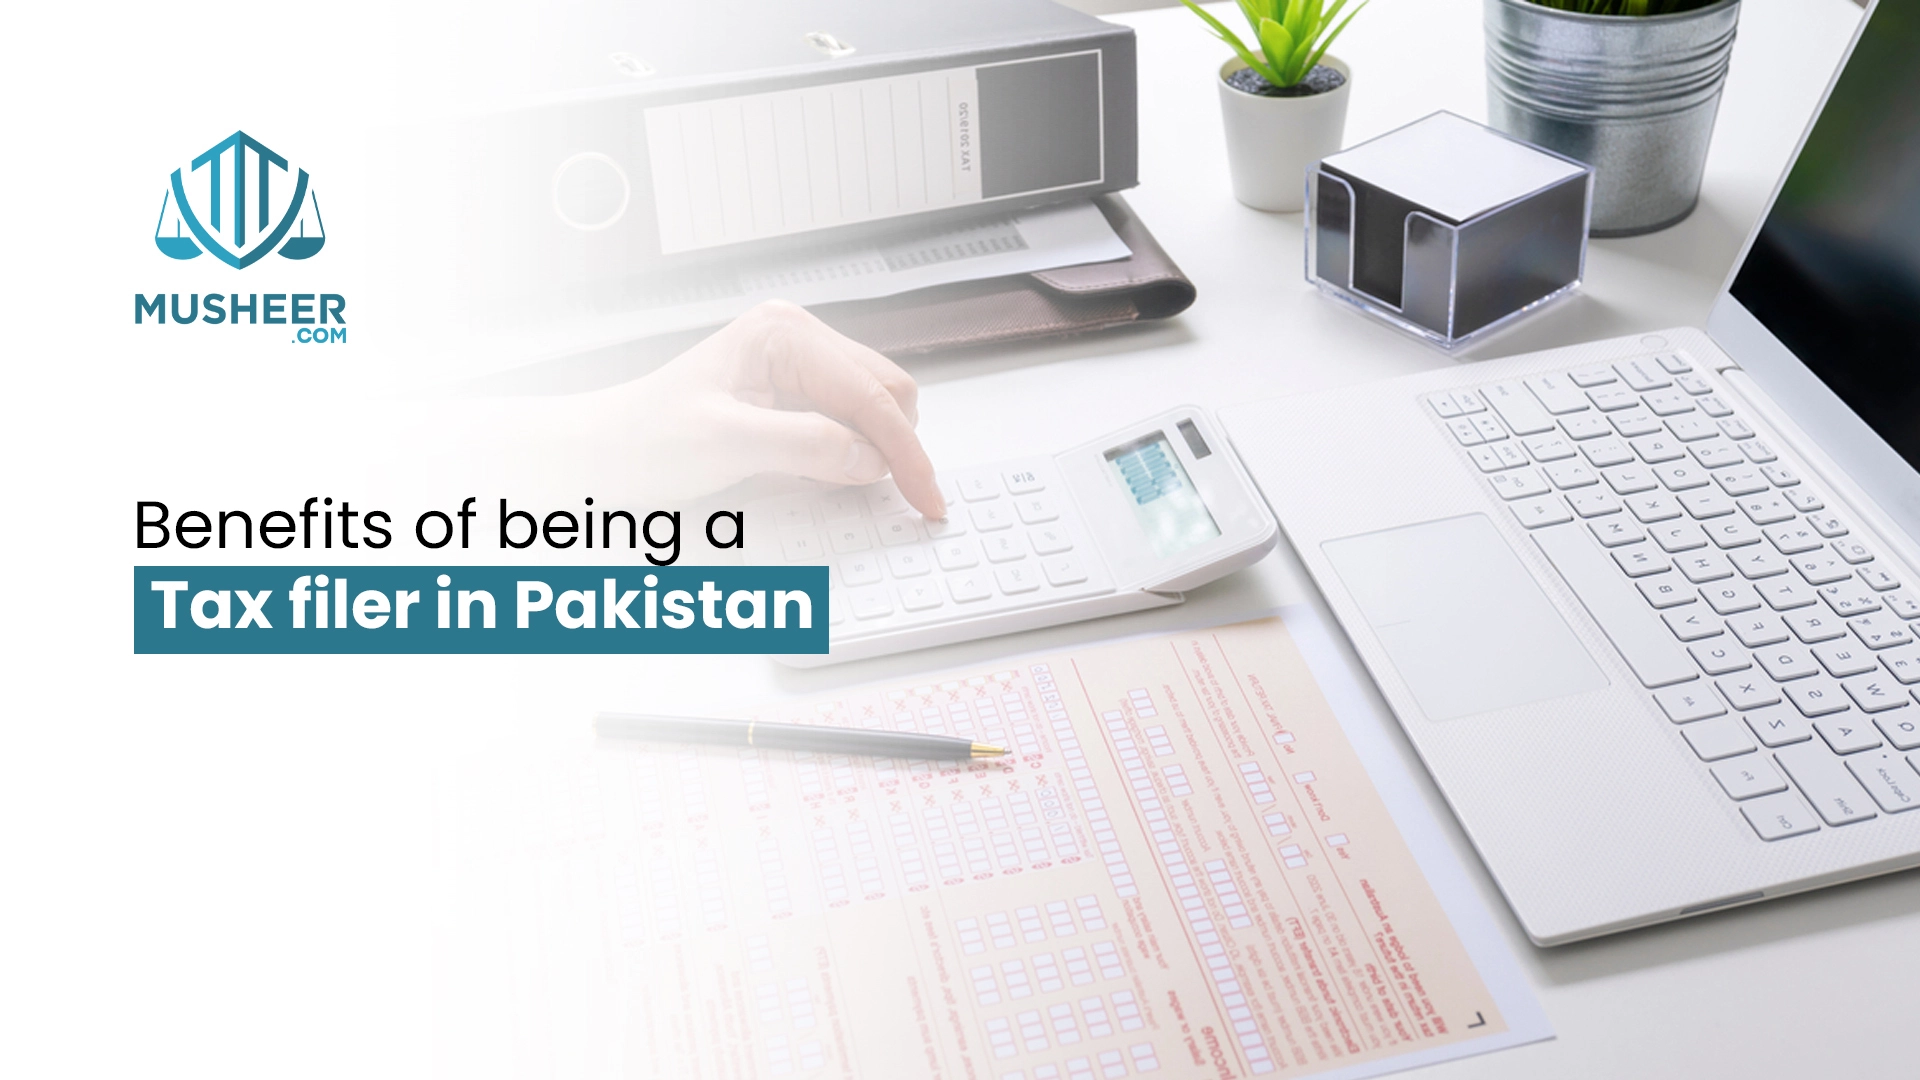 Benefits of Being a Tax Filer in Pakistan